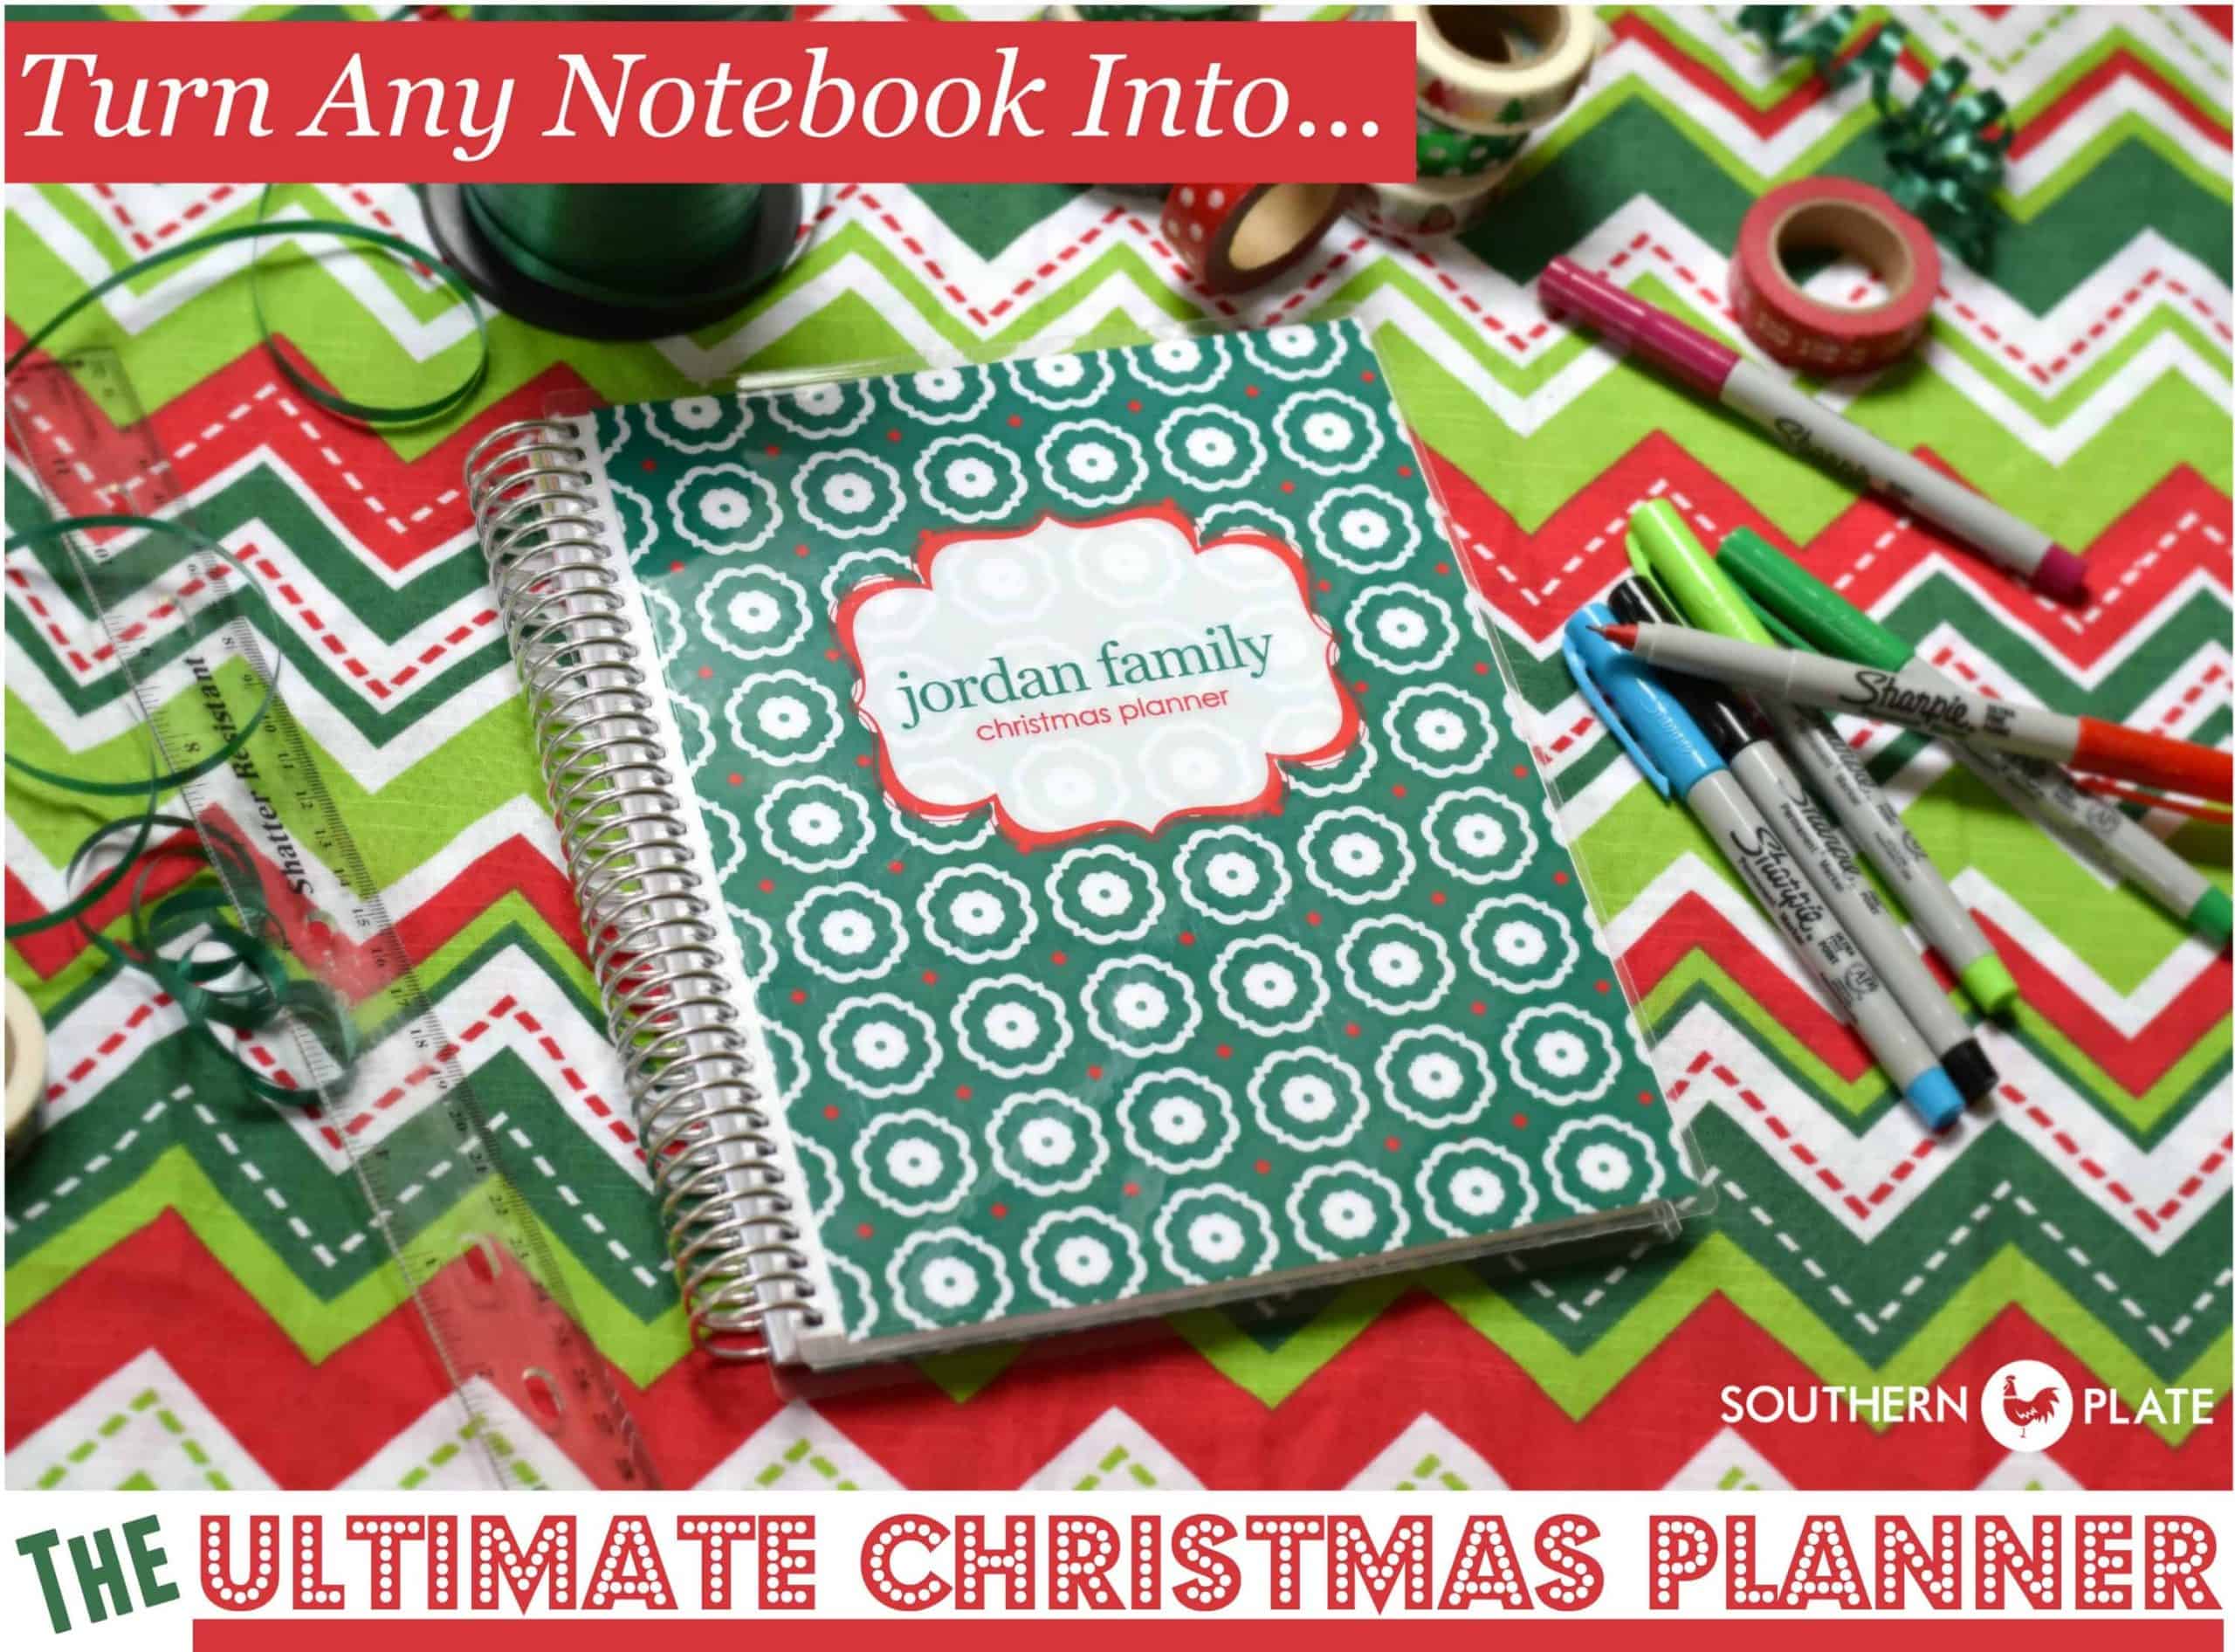 Turn Any Notebook Into The ULTIMATE Christmas Planner